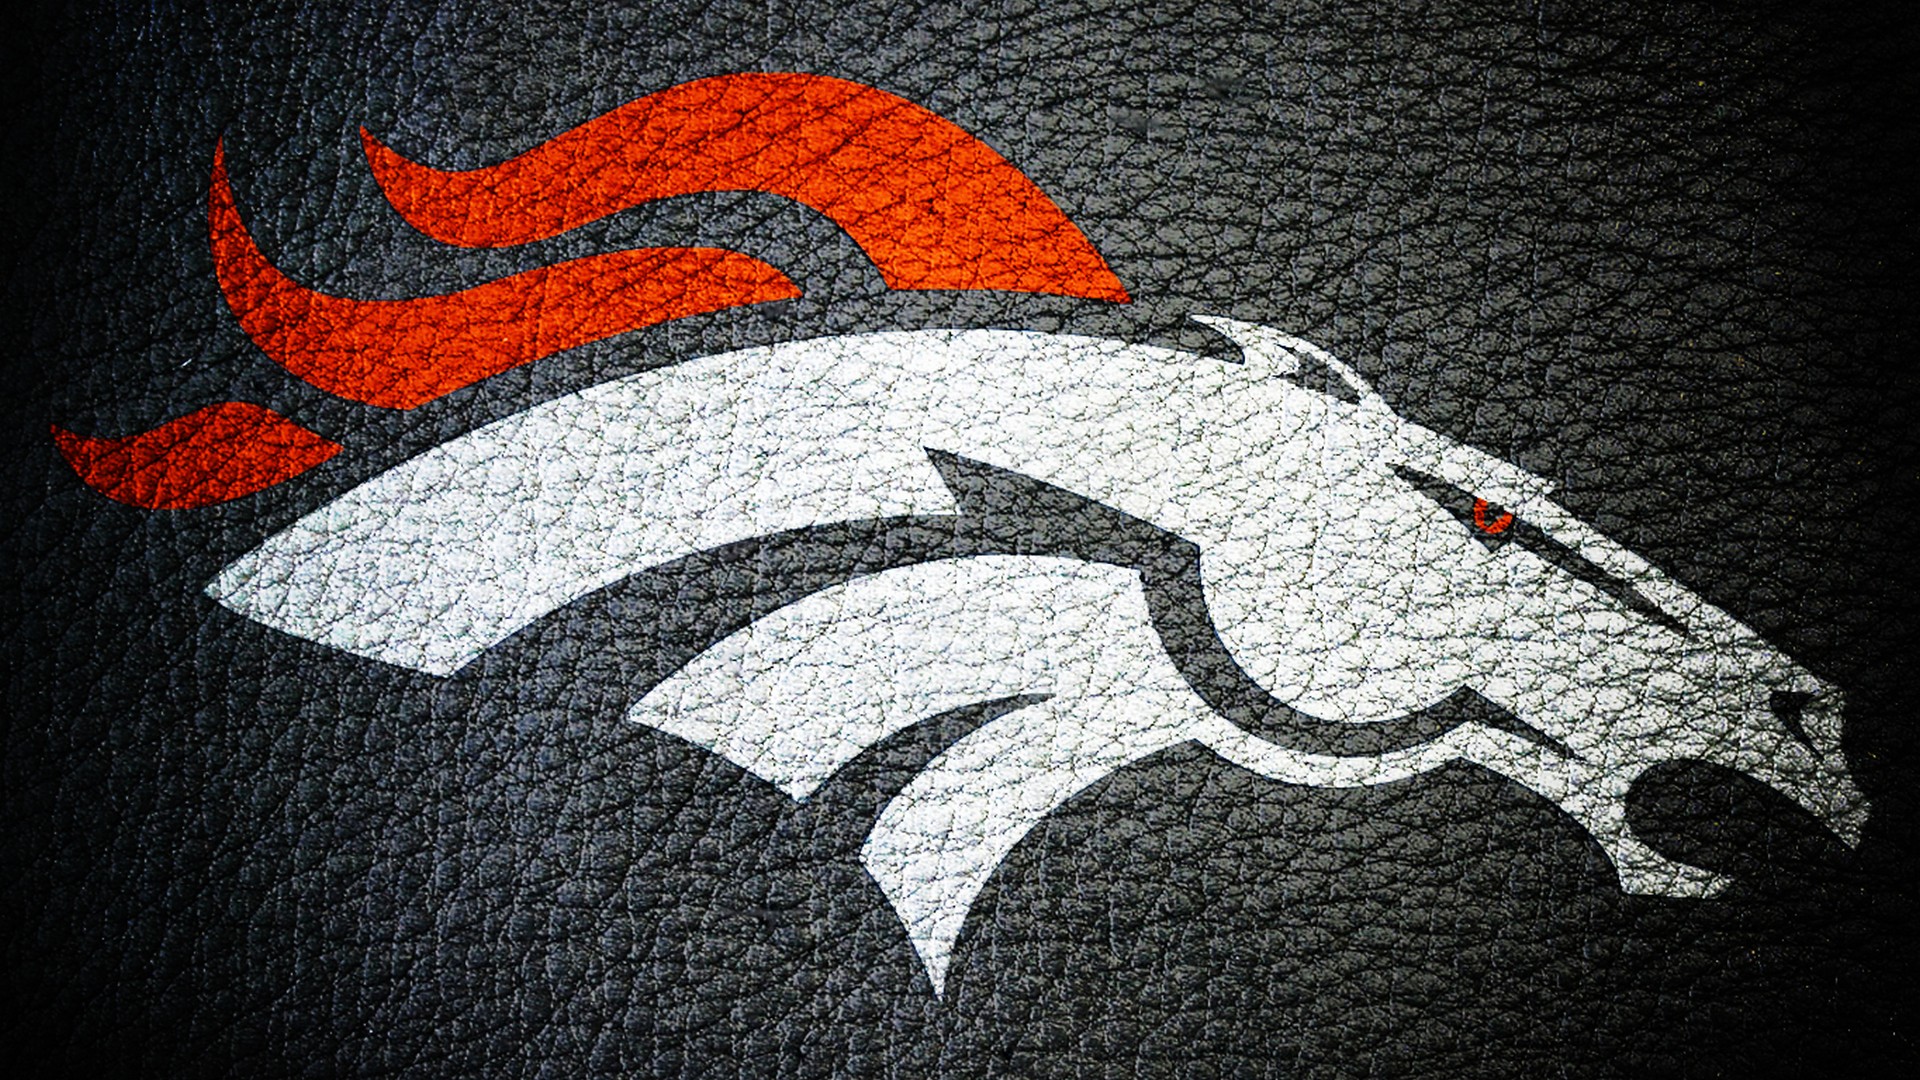 Denver Broncos NFL HD Wallpapers With high-resolution 1920X1080 pixel. You can use this wallpaper for your Mac or Windows Desktop Background, iPhone, Android or Tablet and another Smartphone device